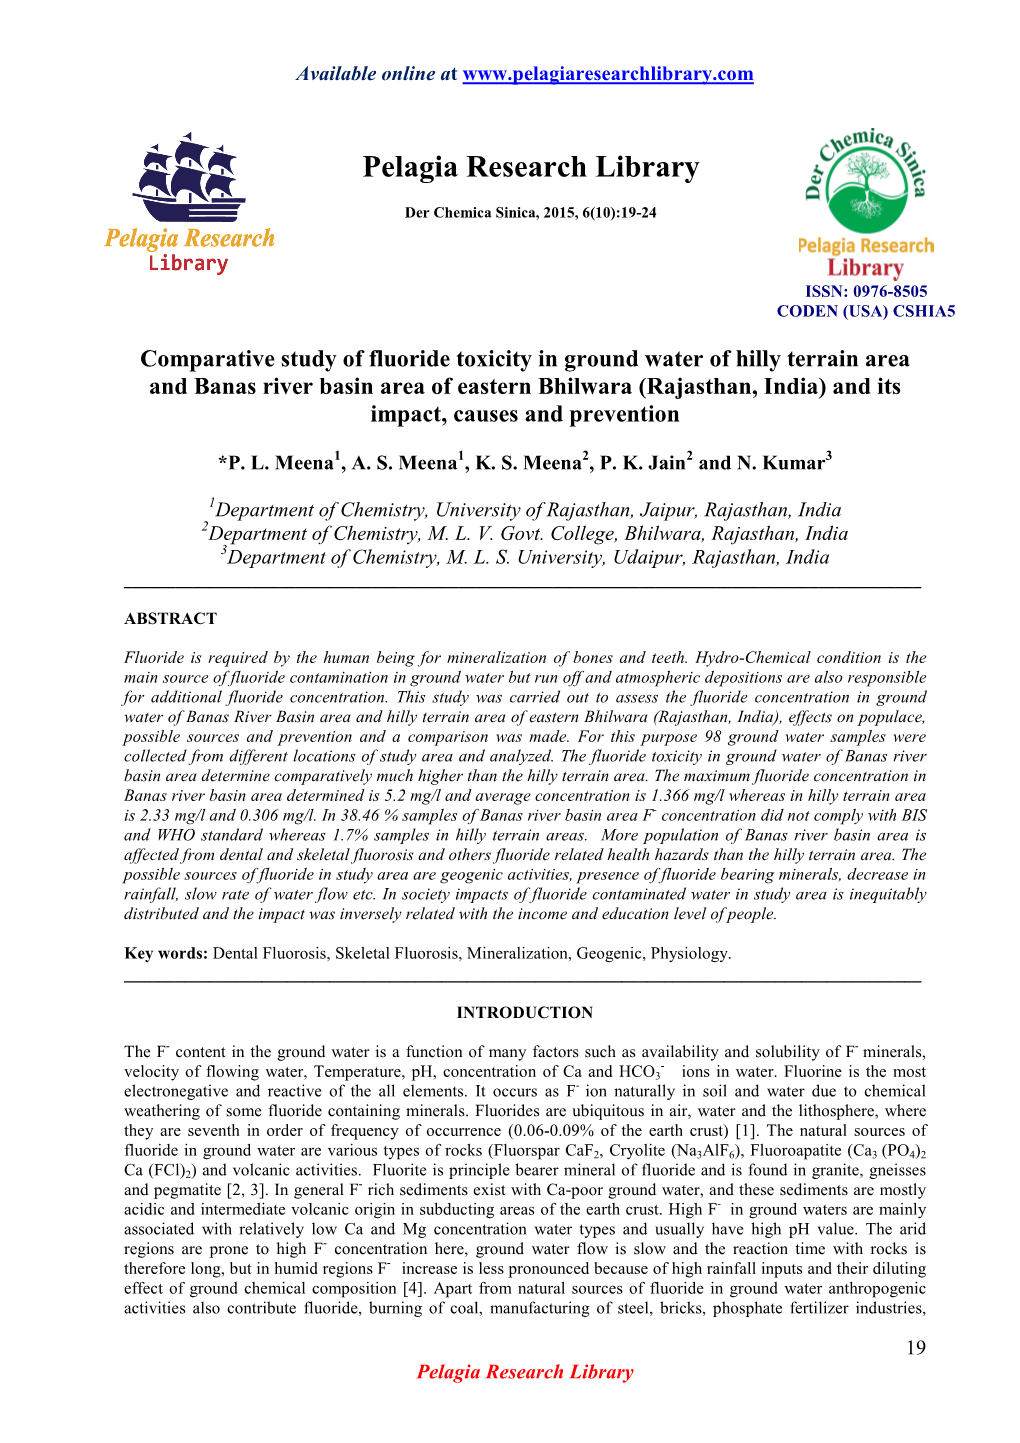 Comparative Study of Fluoride Toxicity in Ground Water of Hilly Terrain Area and Banas River Basin